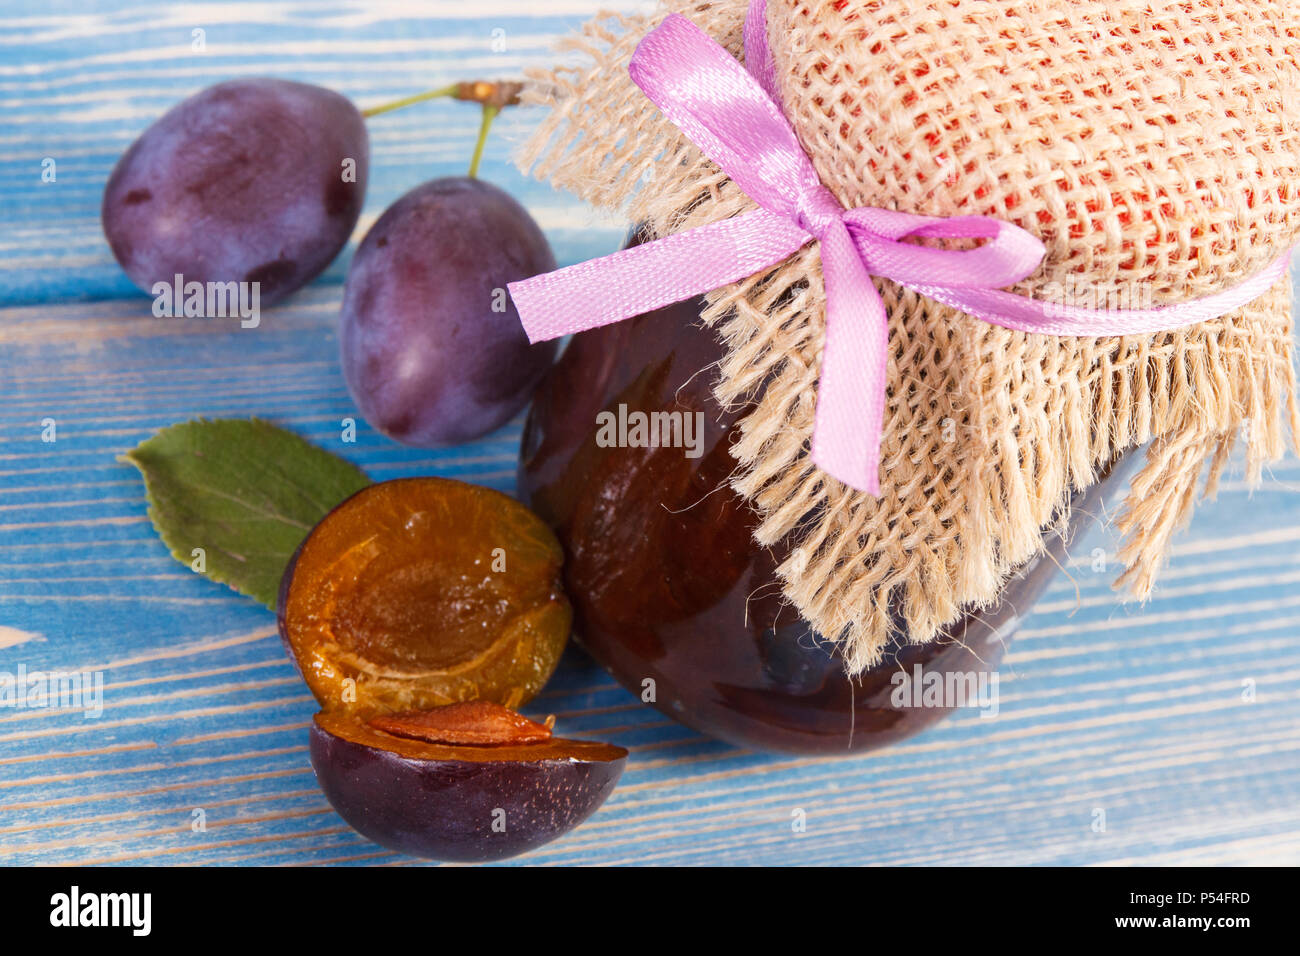 Fresh plum jam or marmalade in glass jar and ripe fruits on blue boards, concept of healthy sweet dessert Stock Photo